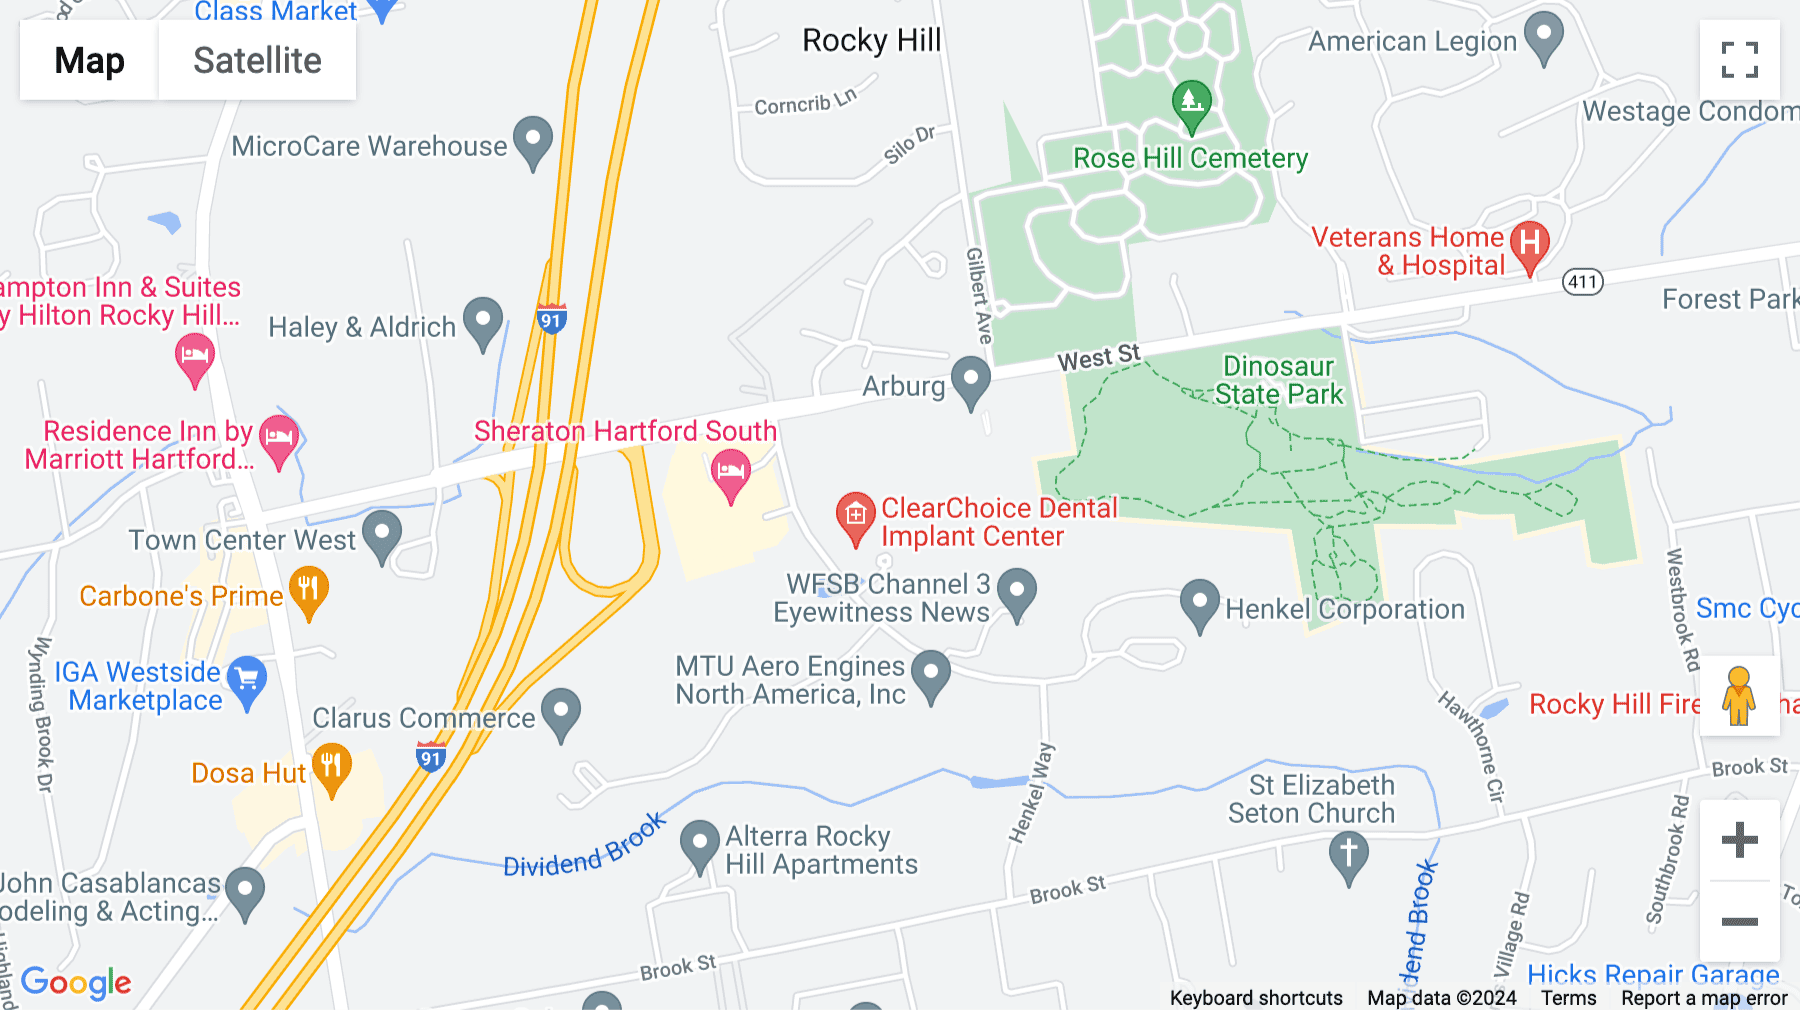 Click for interative map of Corporate Ridge, 175 Capital Blvd., 4th Floor, Rocky Hill, Connecticut, Rocky Hill